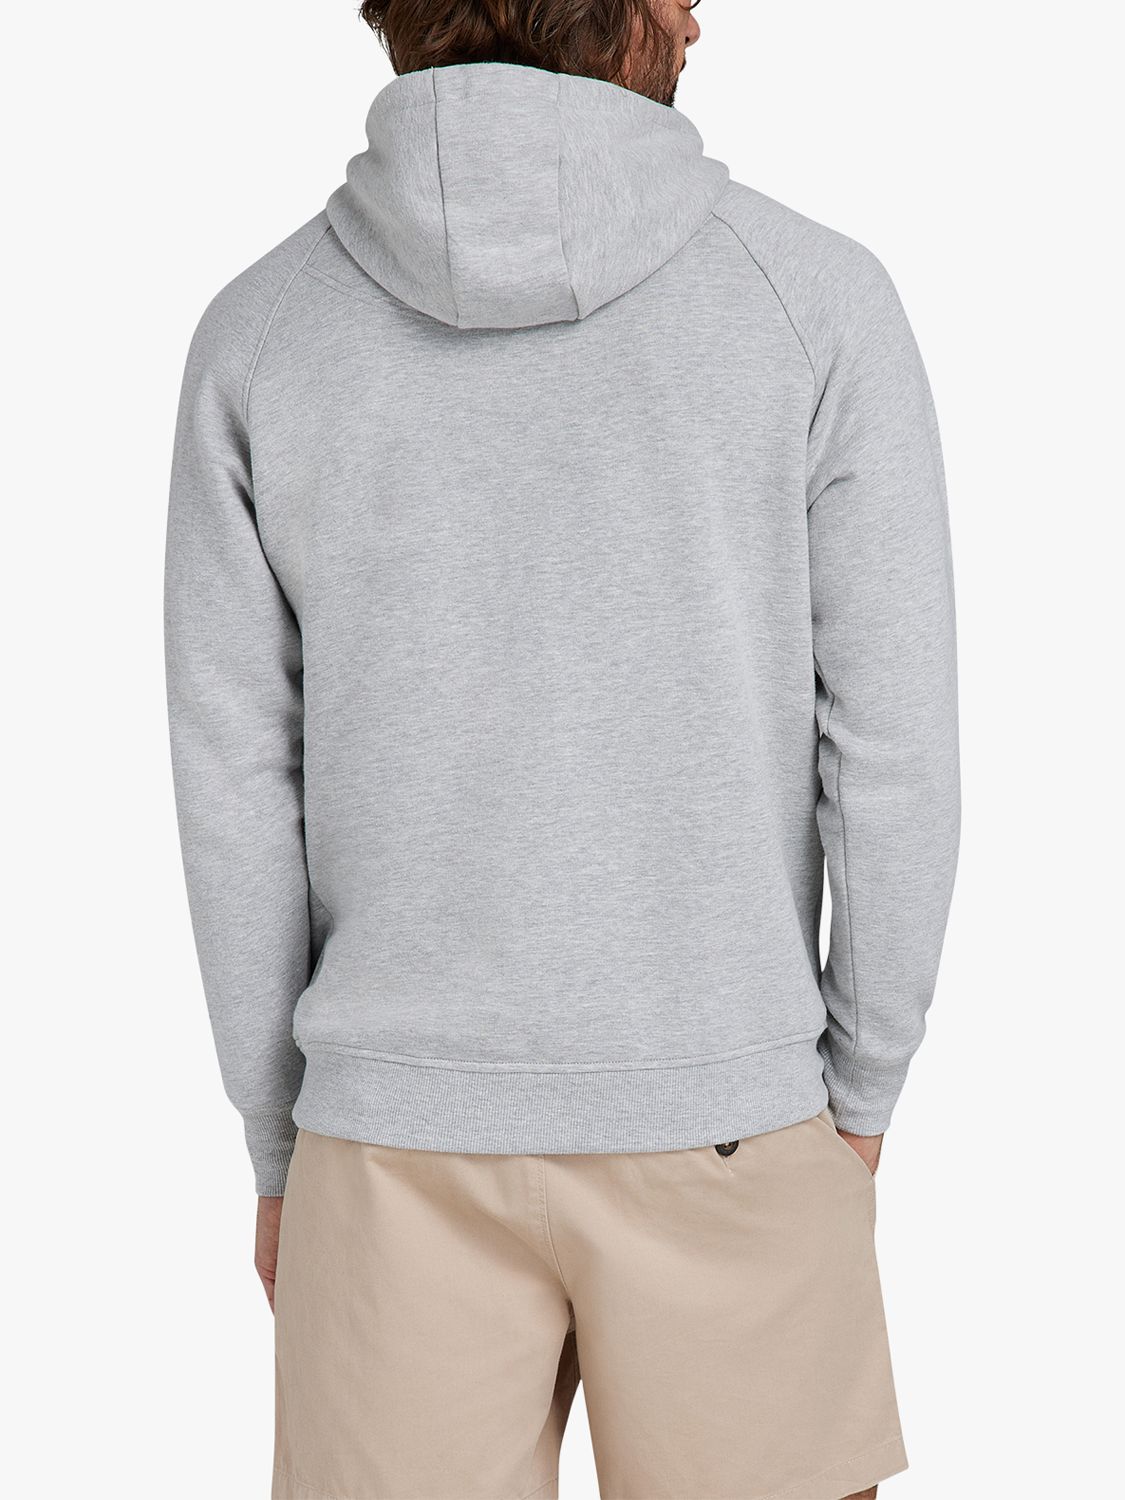 Raging Bull Classic Woven Patch Overhead Hoodie, Grey Marl, M